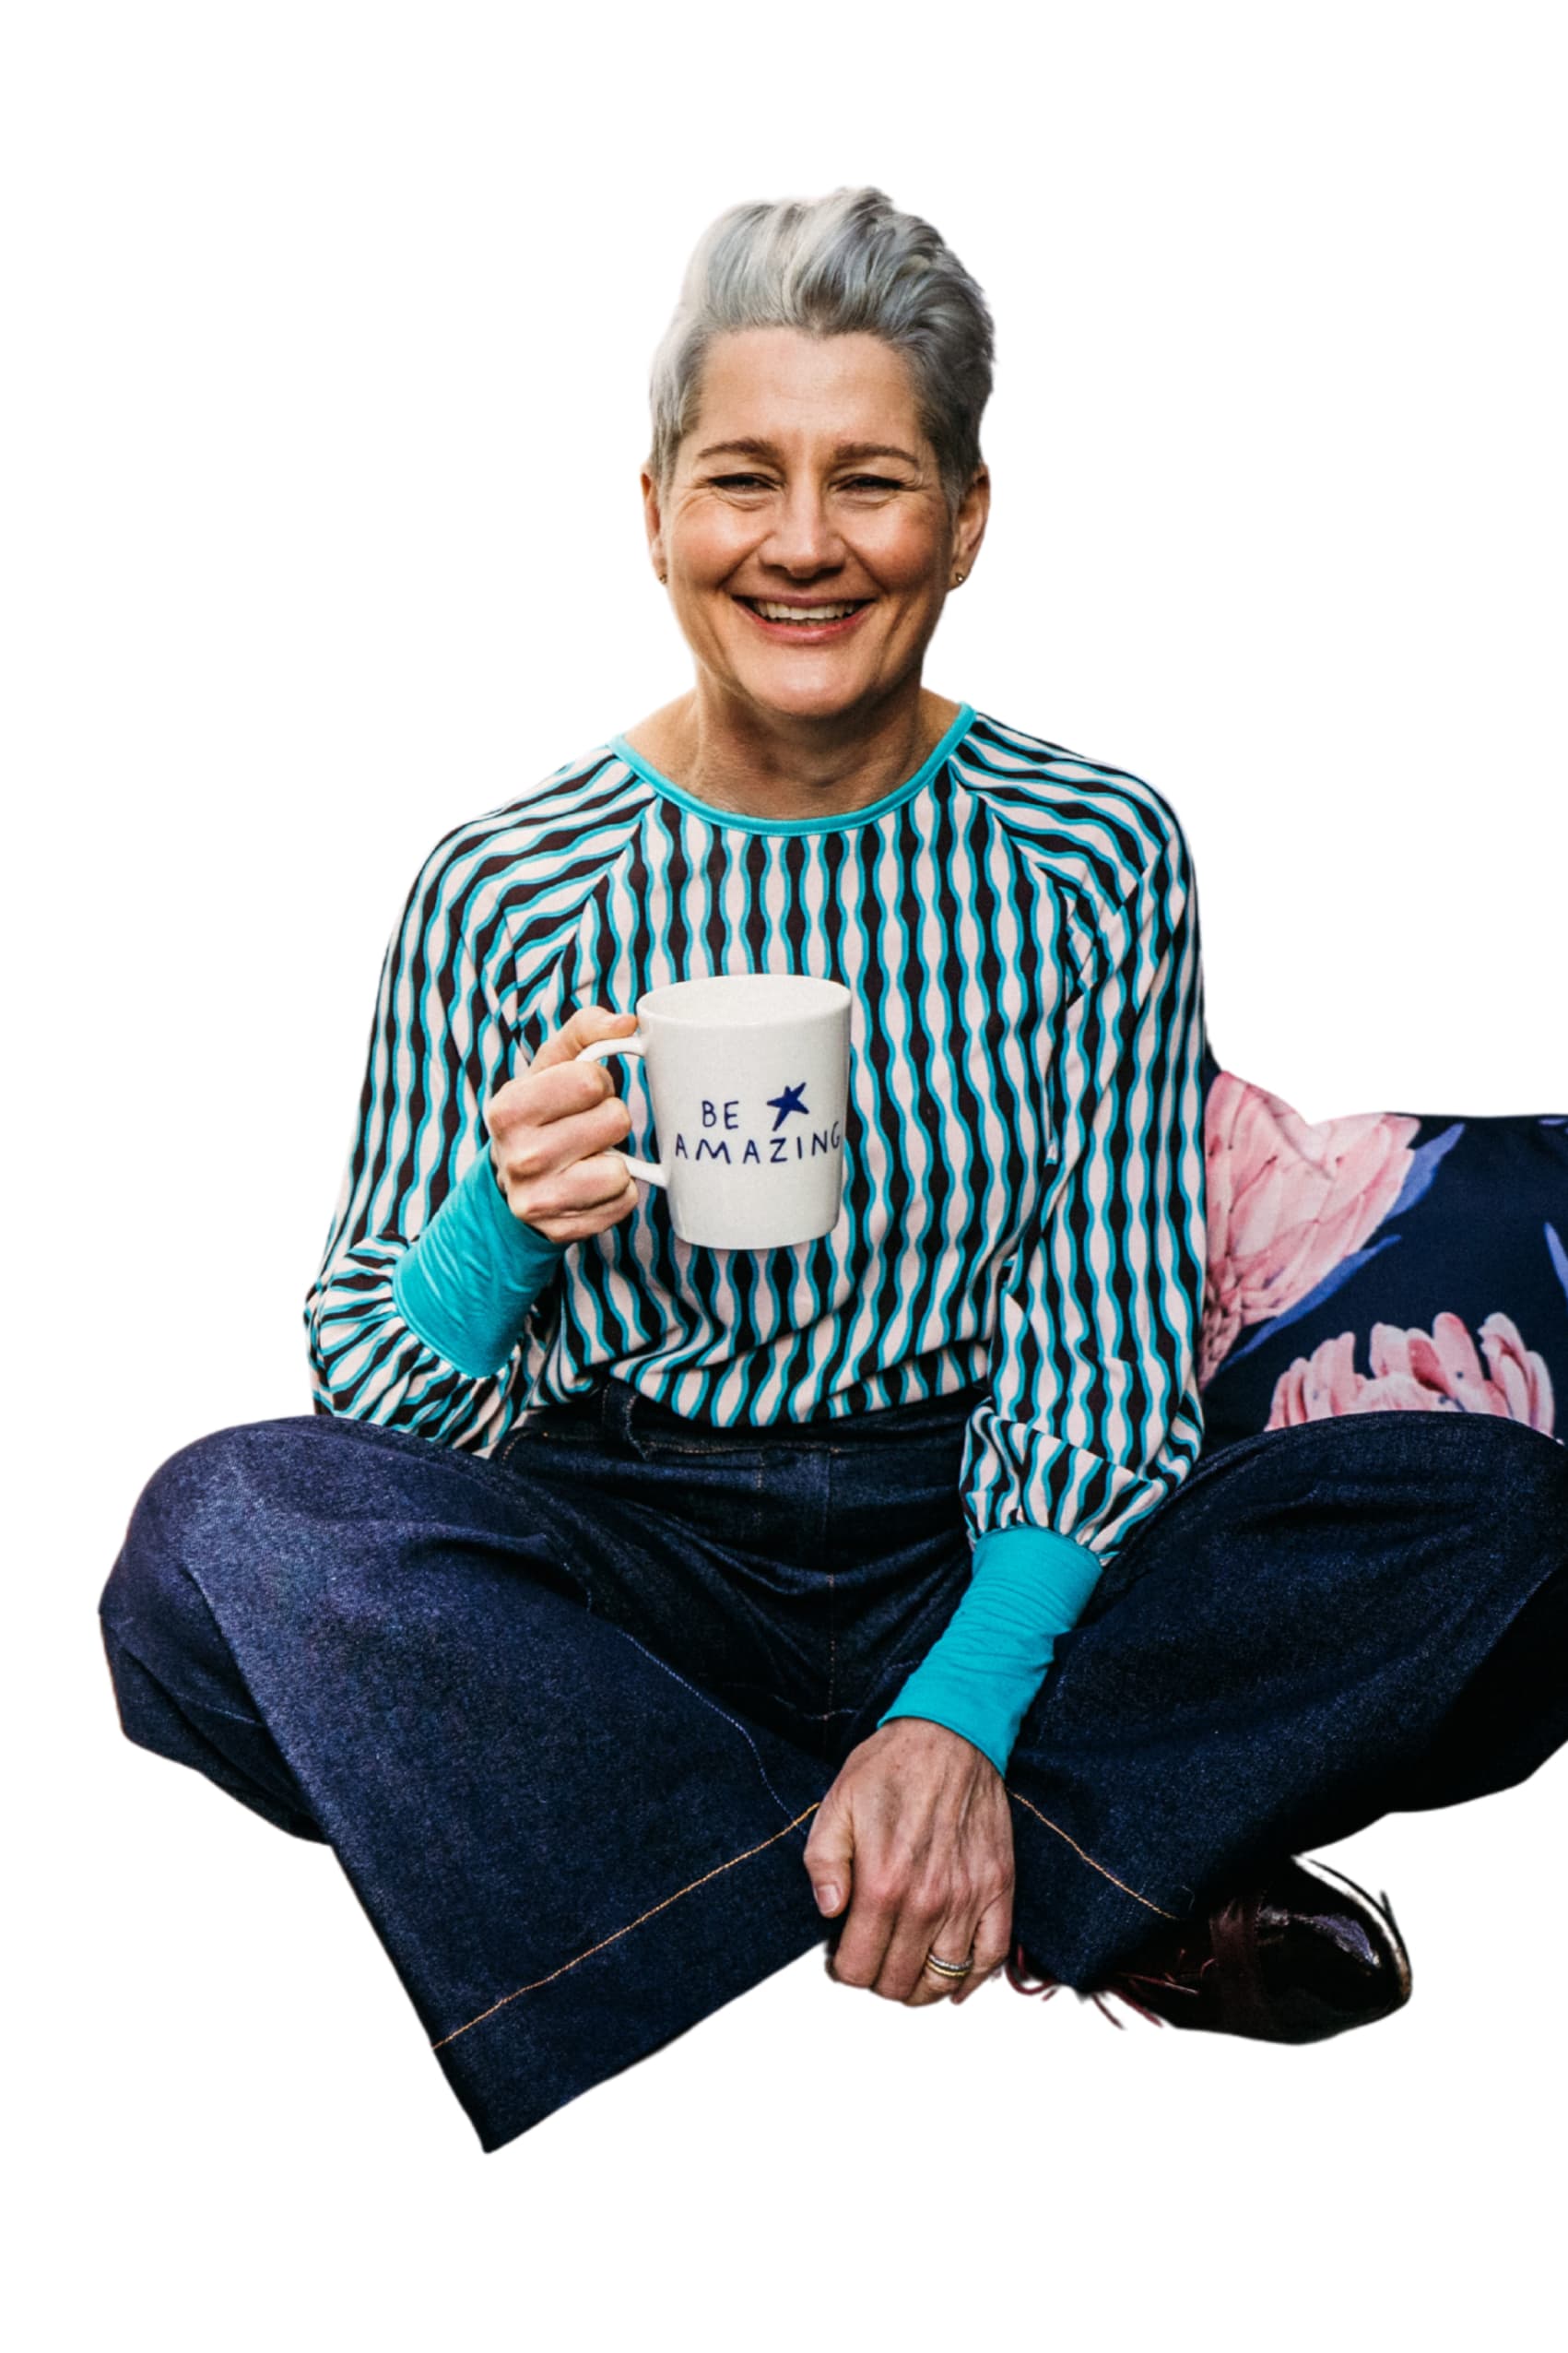 A lady with grey hair is sitting cross-legged and smiling at the camera. She is wearing a turquoise top and holding a mug that reads be amazing.